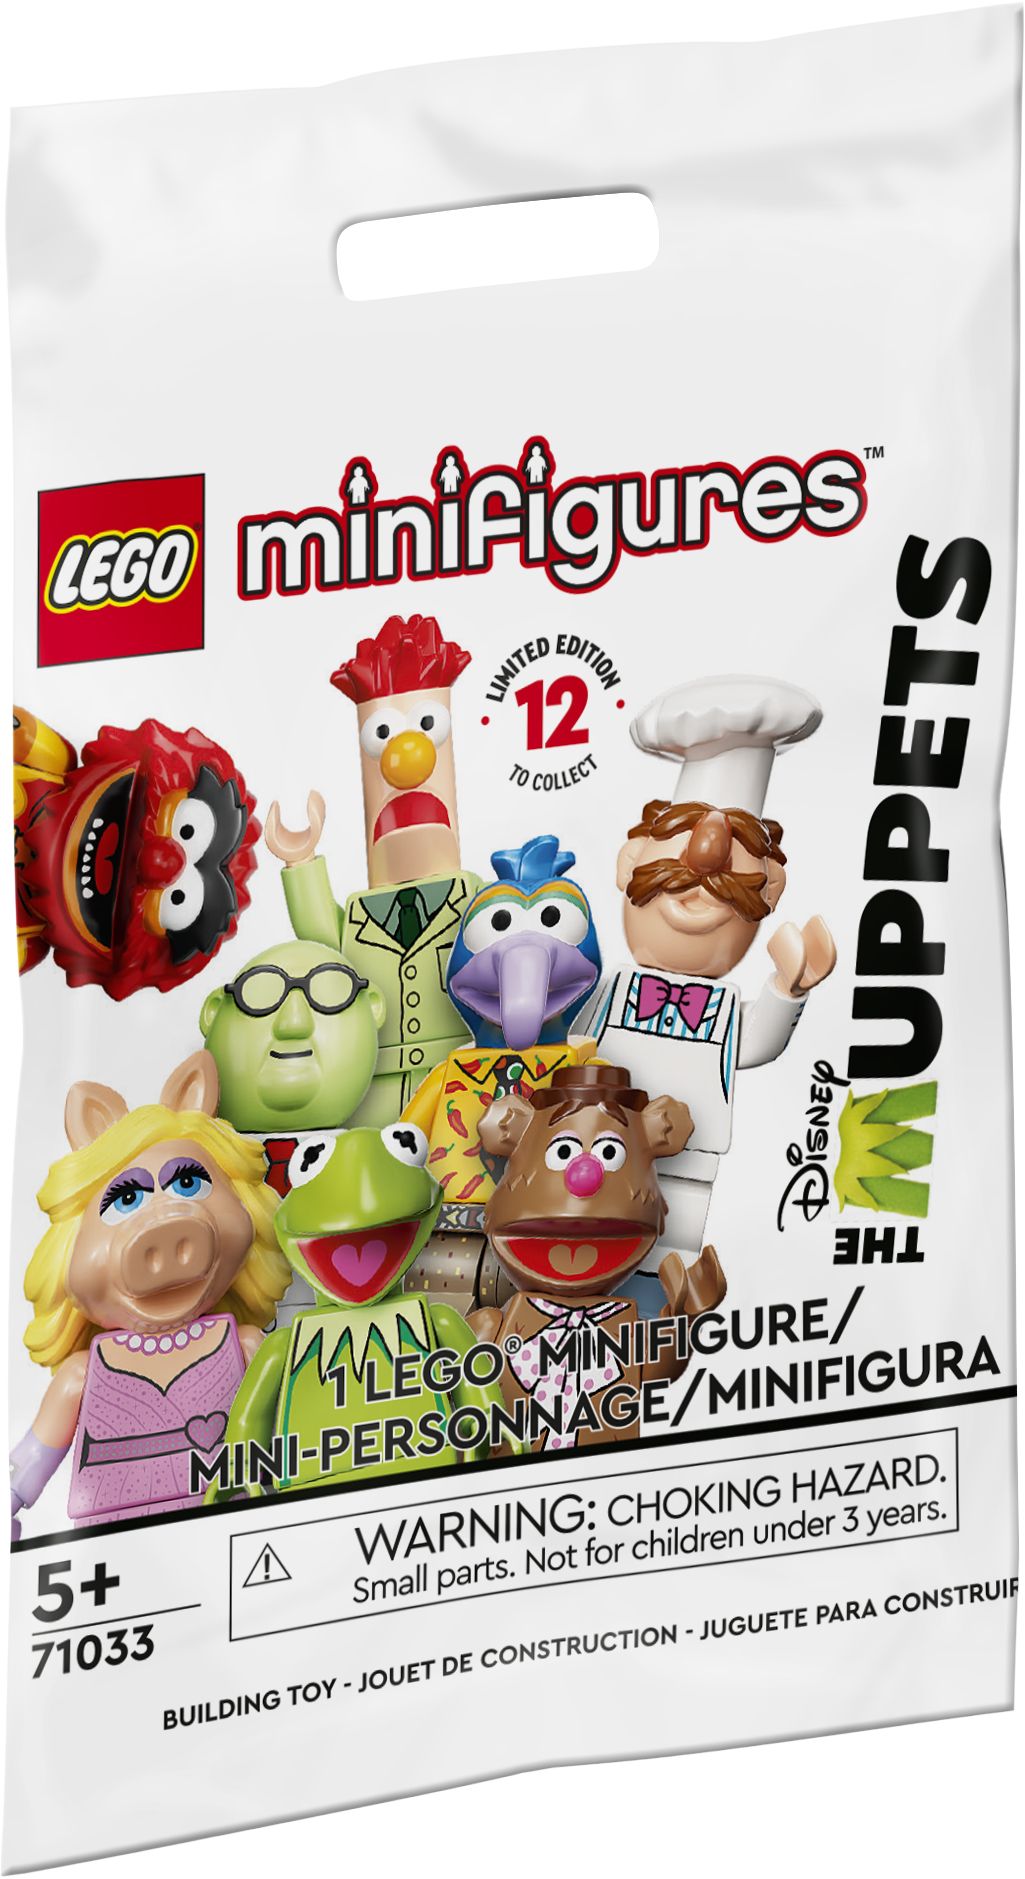 LEGO Collectable Minifigures 71033 Die Muppets LEGO_71033_box1_v140.jpg